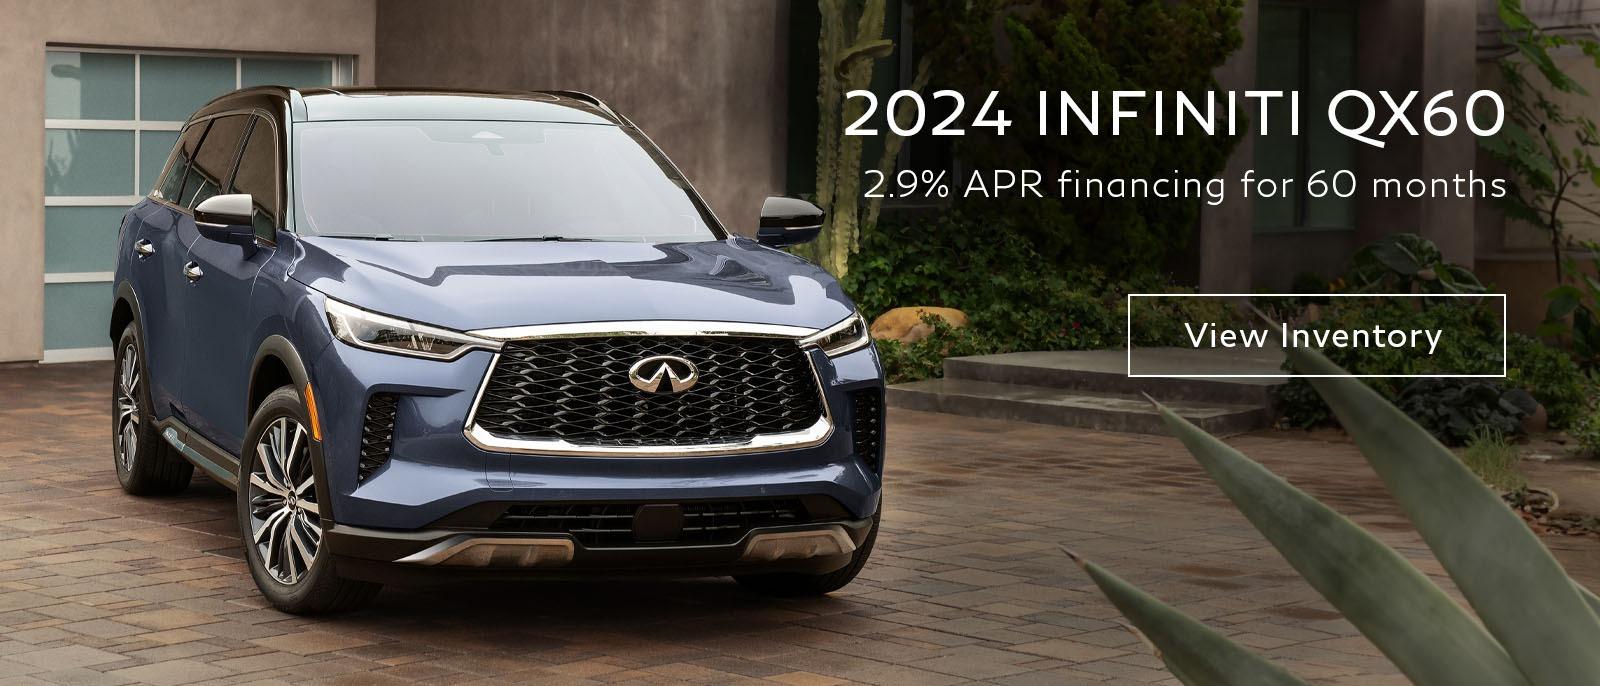 2.9% APR Financing for 60 Months on 2024 QX60